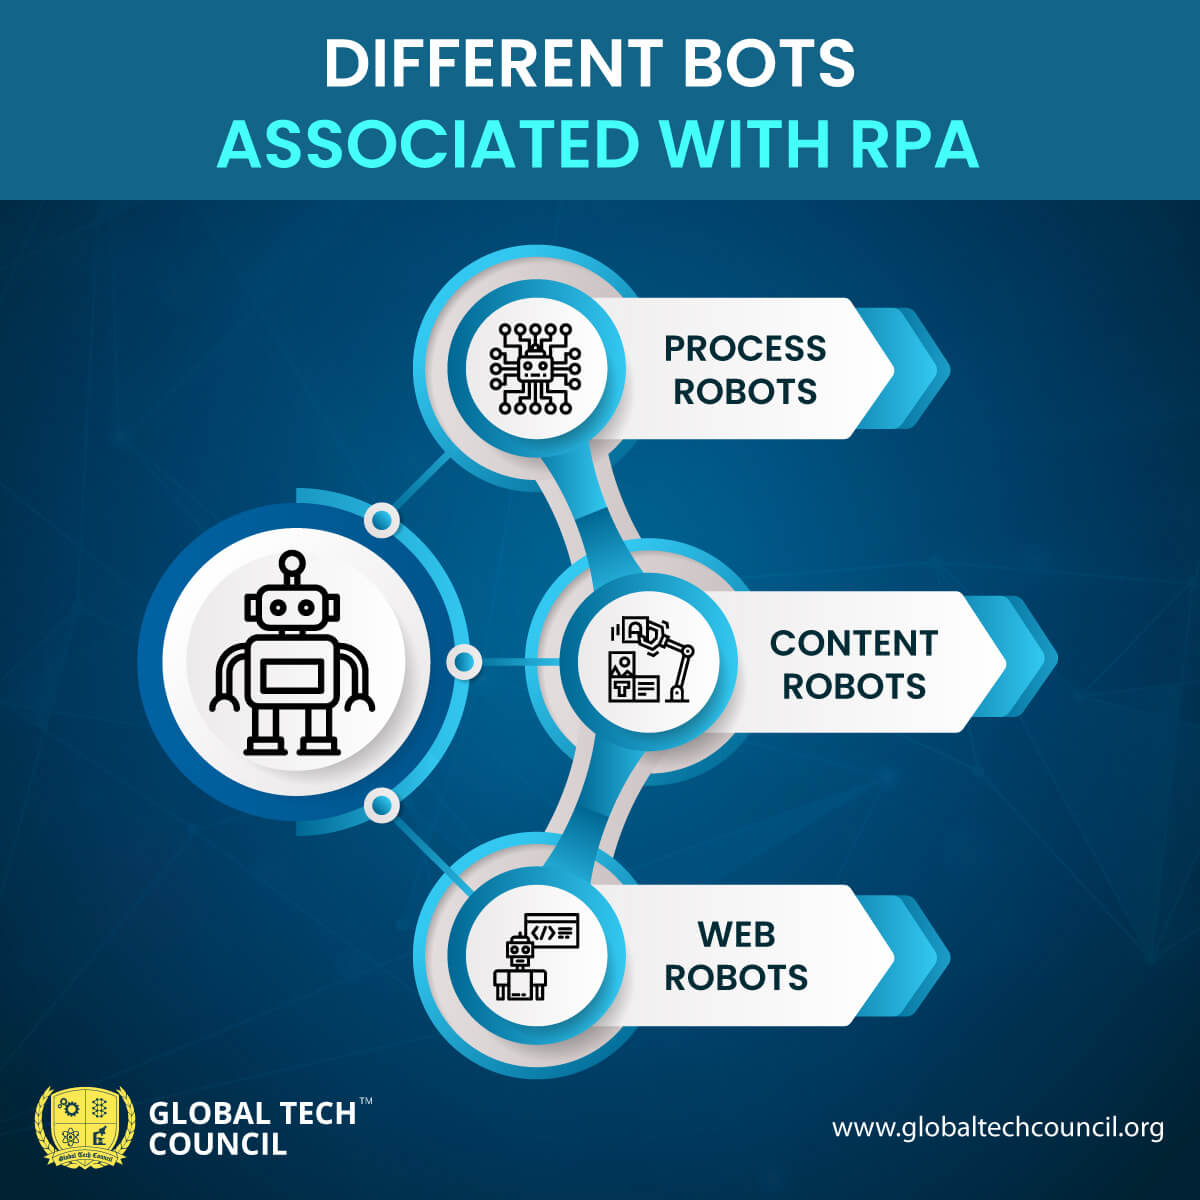 diff-bots-associated-with-rpa